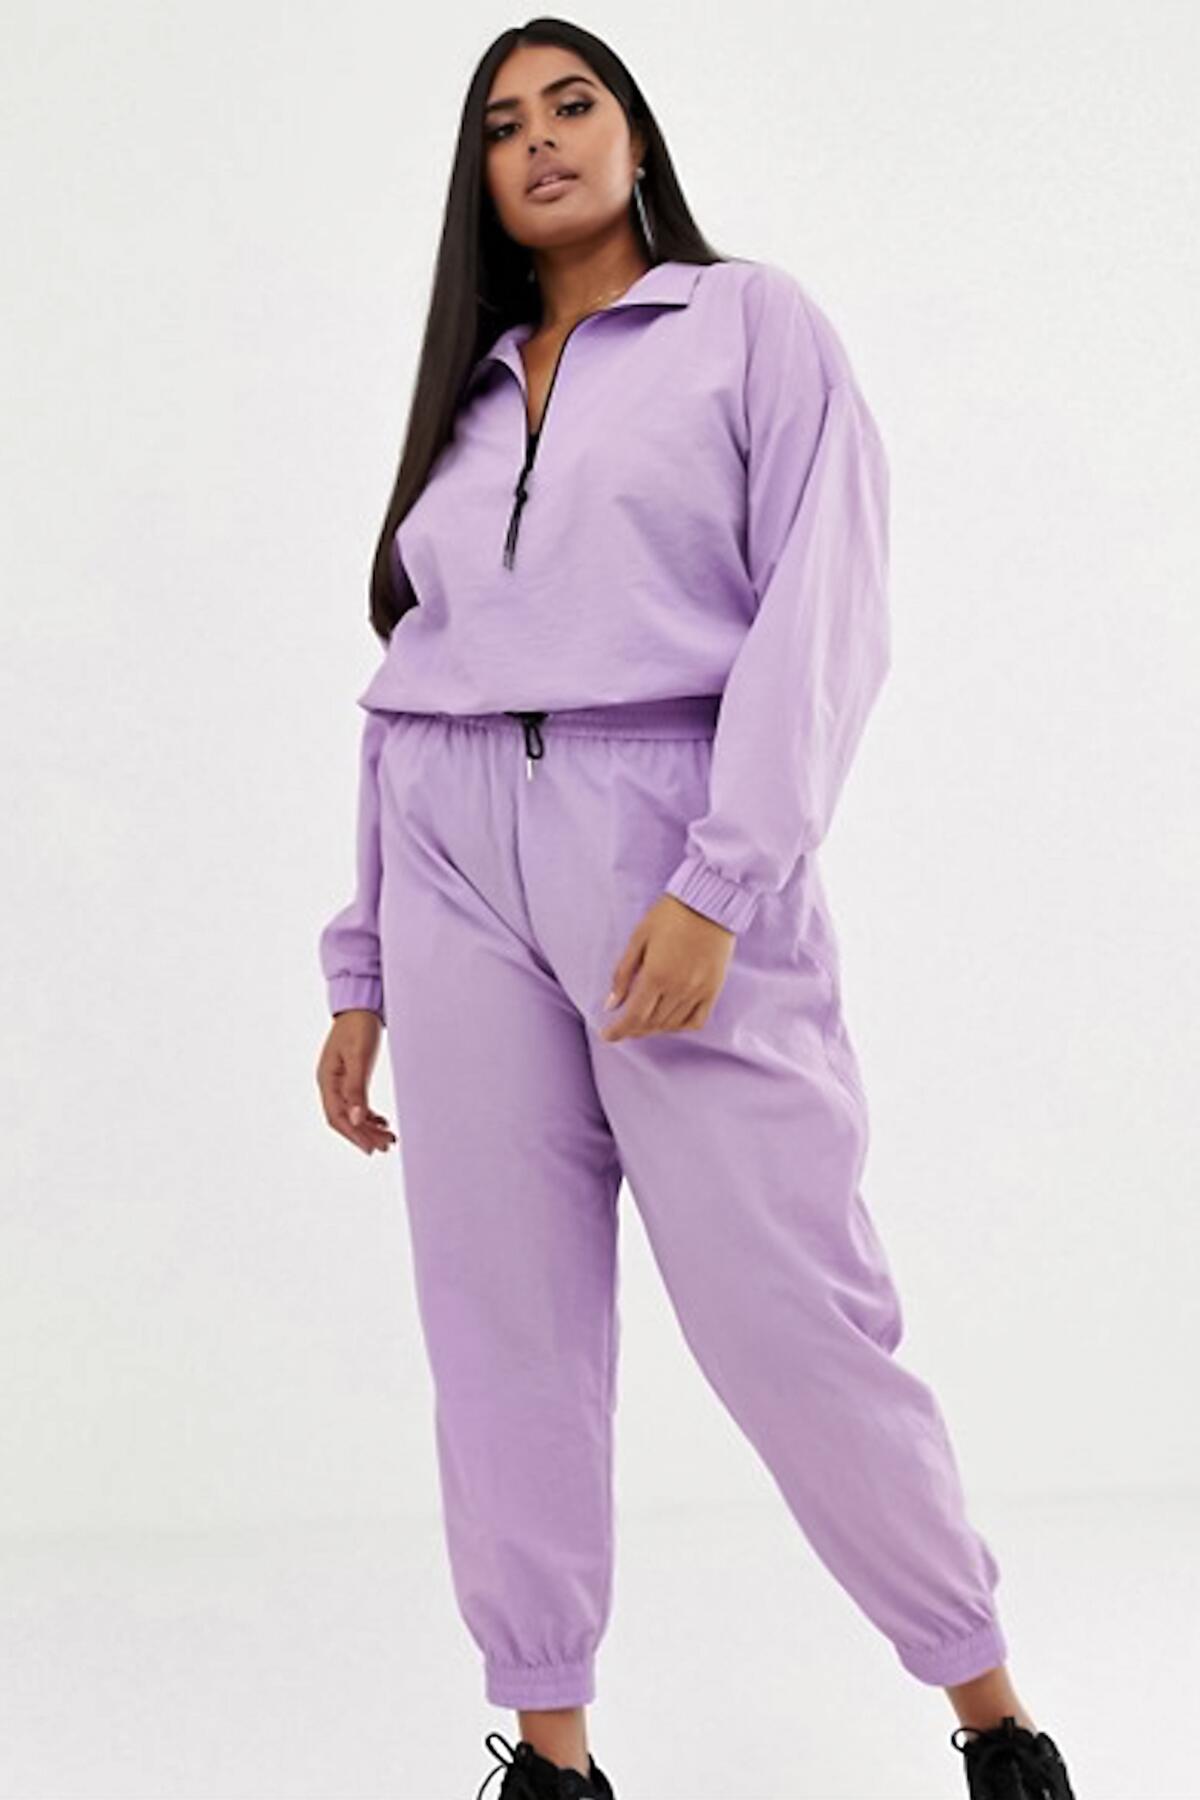 13 Tracksuits for Traveling That Will Bump You Up to Icon Class